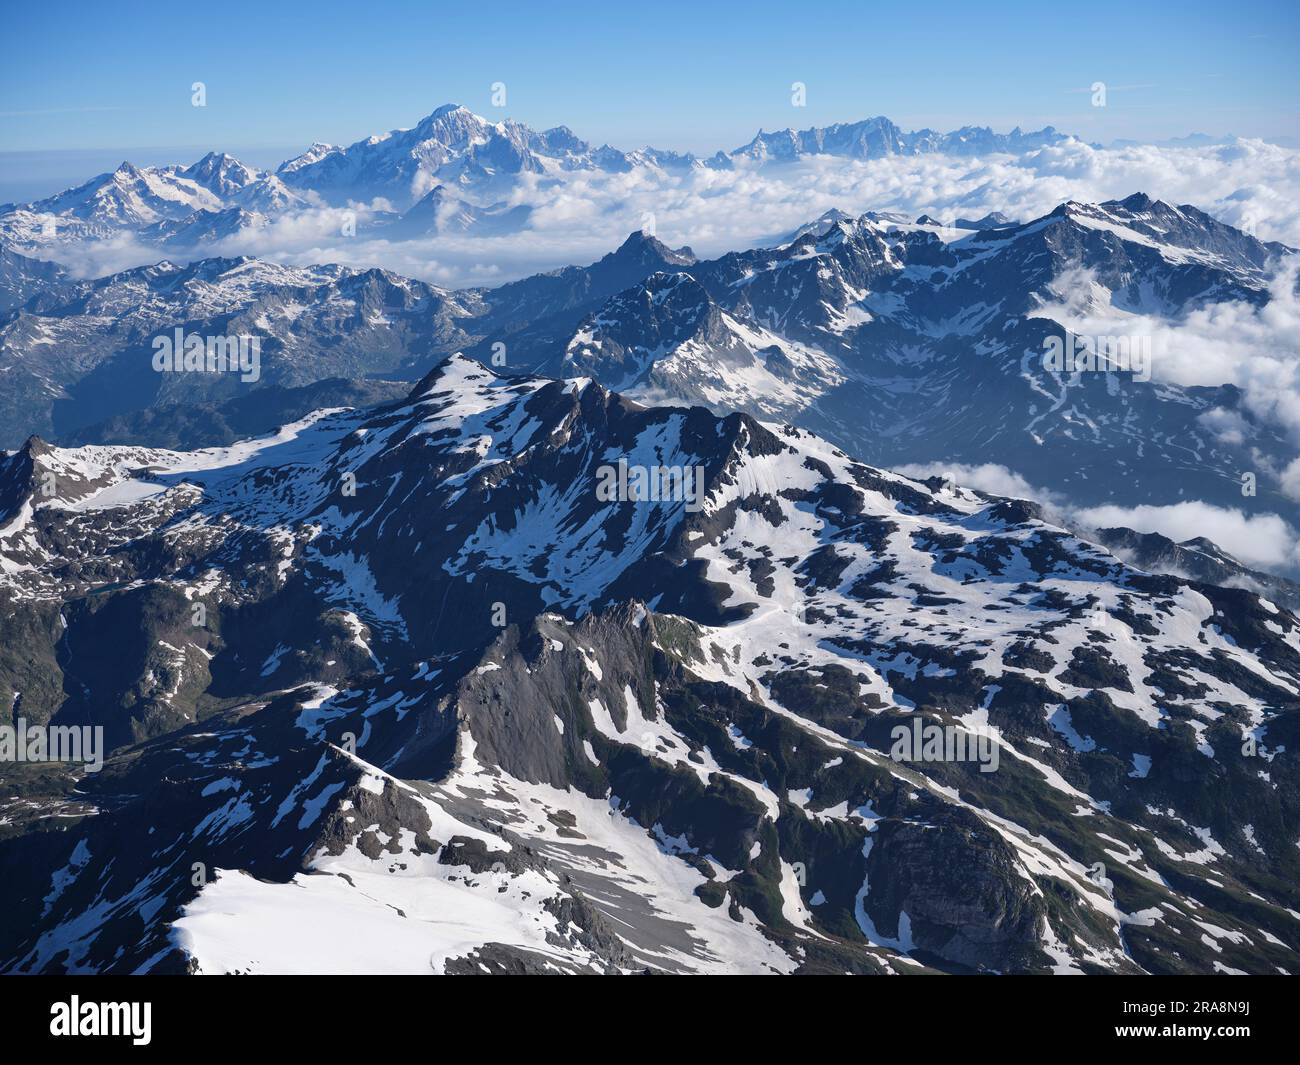 AERIAL VIEW. Mountainous landscape of the Upper Valgrisenche Valley with the Mont-Blanc Massif in the distance. Aosta Valley, Italy. Stock Photo